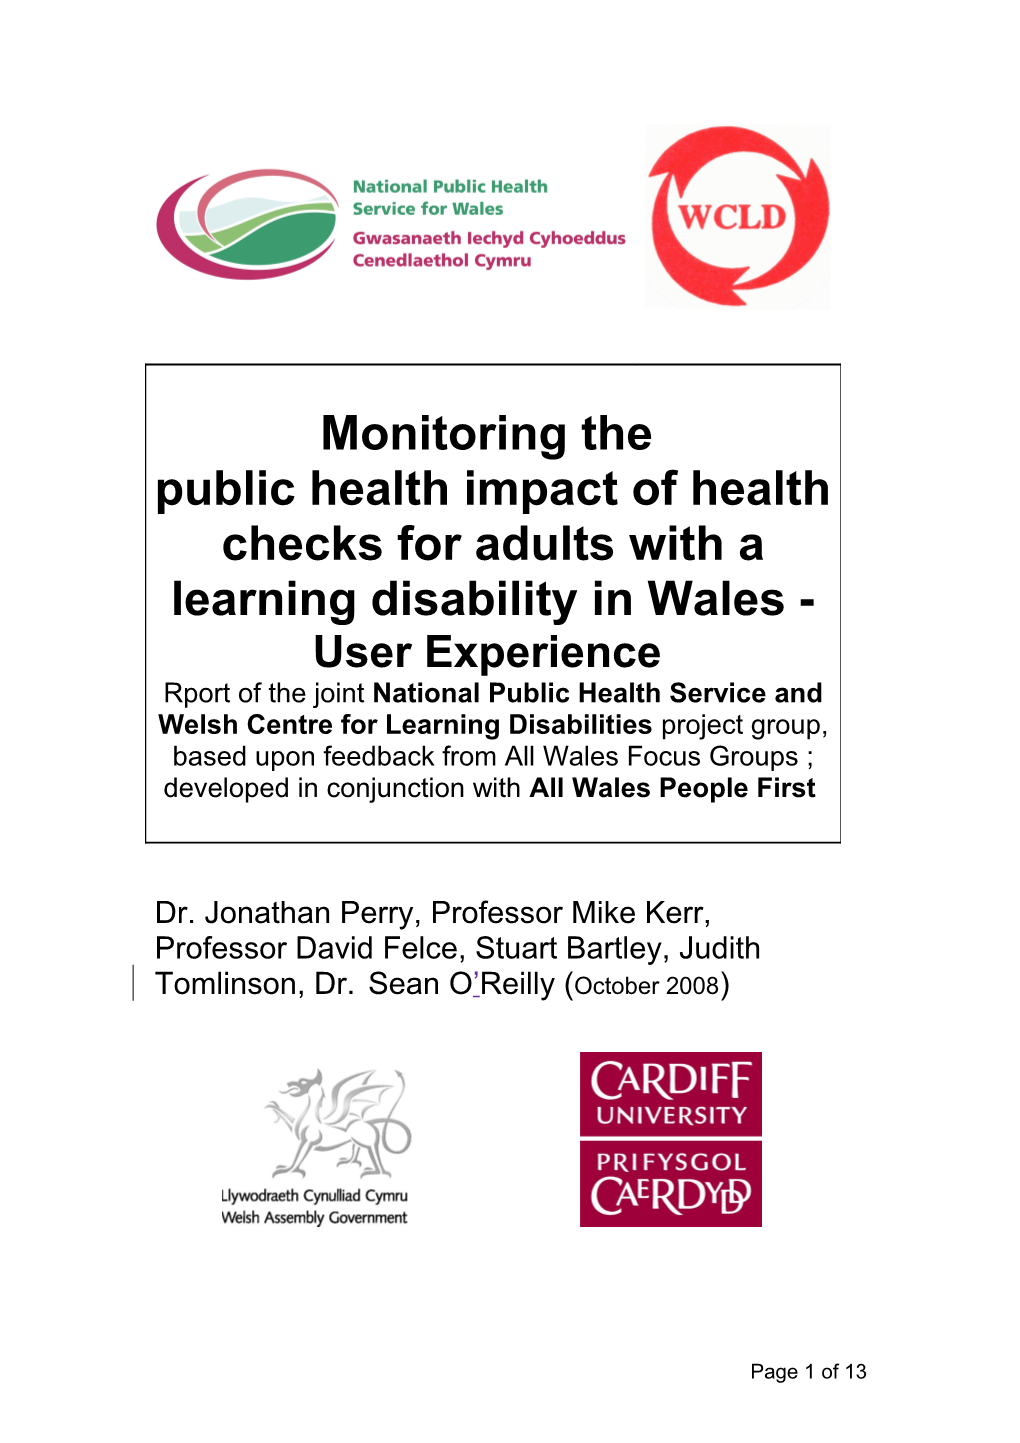 Monitoring the Public Health Impact of Health Checks for Adults with a Learning Disability